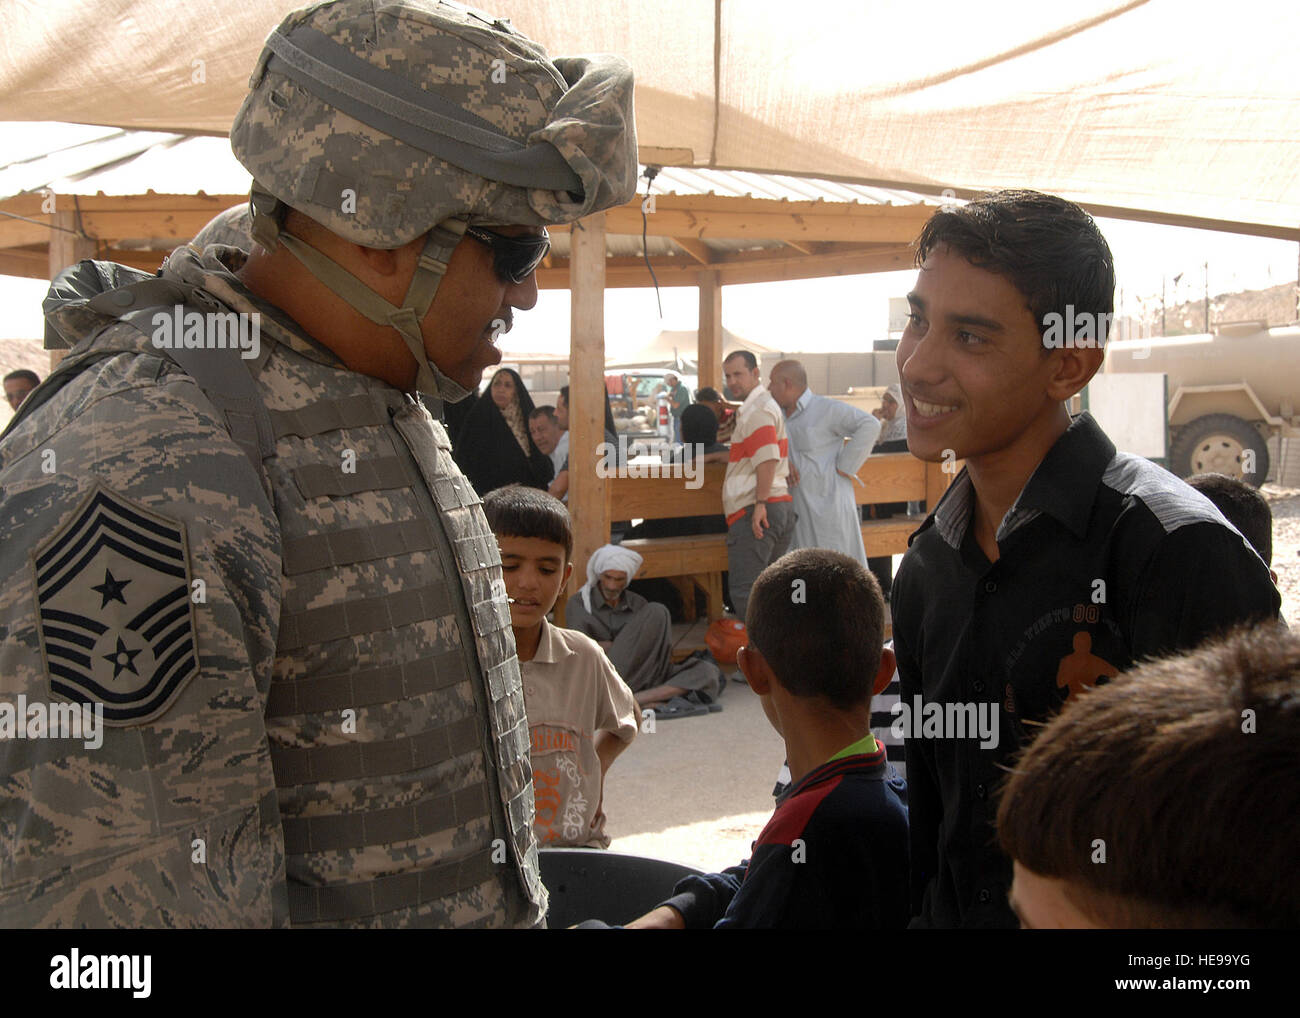 Camp Bucca, Iraq -- Chief Master Sgt. Jeffrey Antwine, 386th Air Expeditionary Wing command chief, jokes with a young Iraqi boy waiting to visit his father at the Theater Internment Facility (TIF) at Camp Bucca, Iraq, on Sept. 29. The 887th Expeditionary Security Forces Squadron controls access to prisoners at the TIF and processes visitation procedures for family members. The Air Force works side by side with Army Soldiers in manning the facility, which houses more than 18,000 inmates. Tech. Sgt. Raheem Moore) Stock Photo